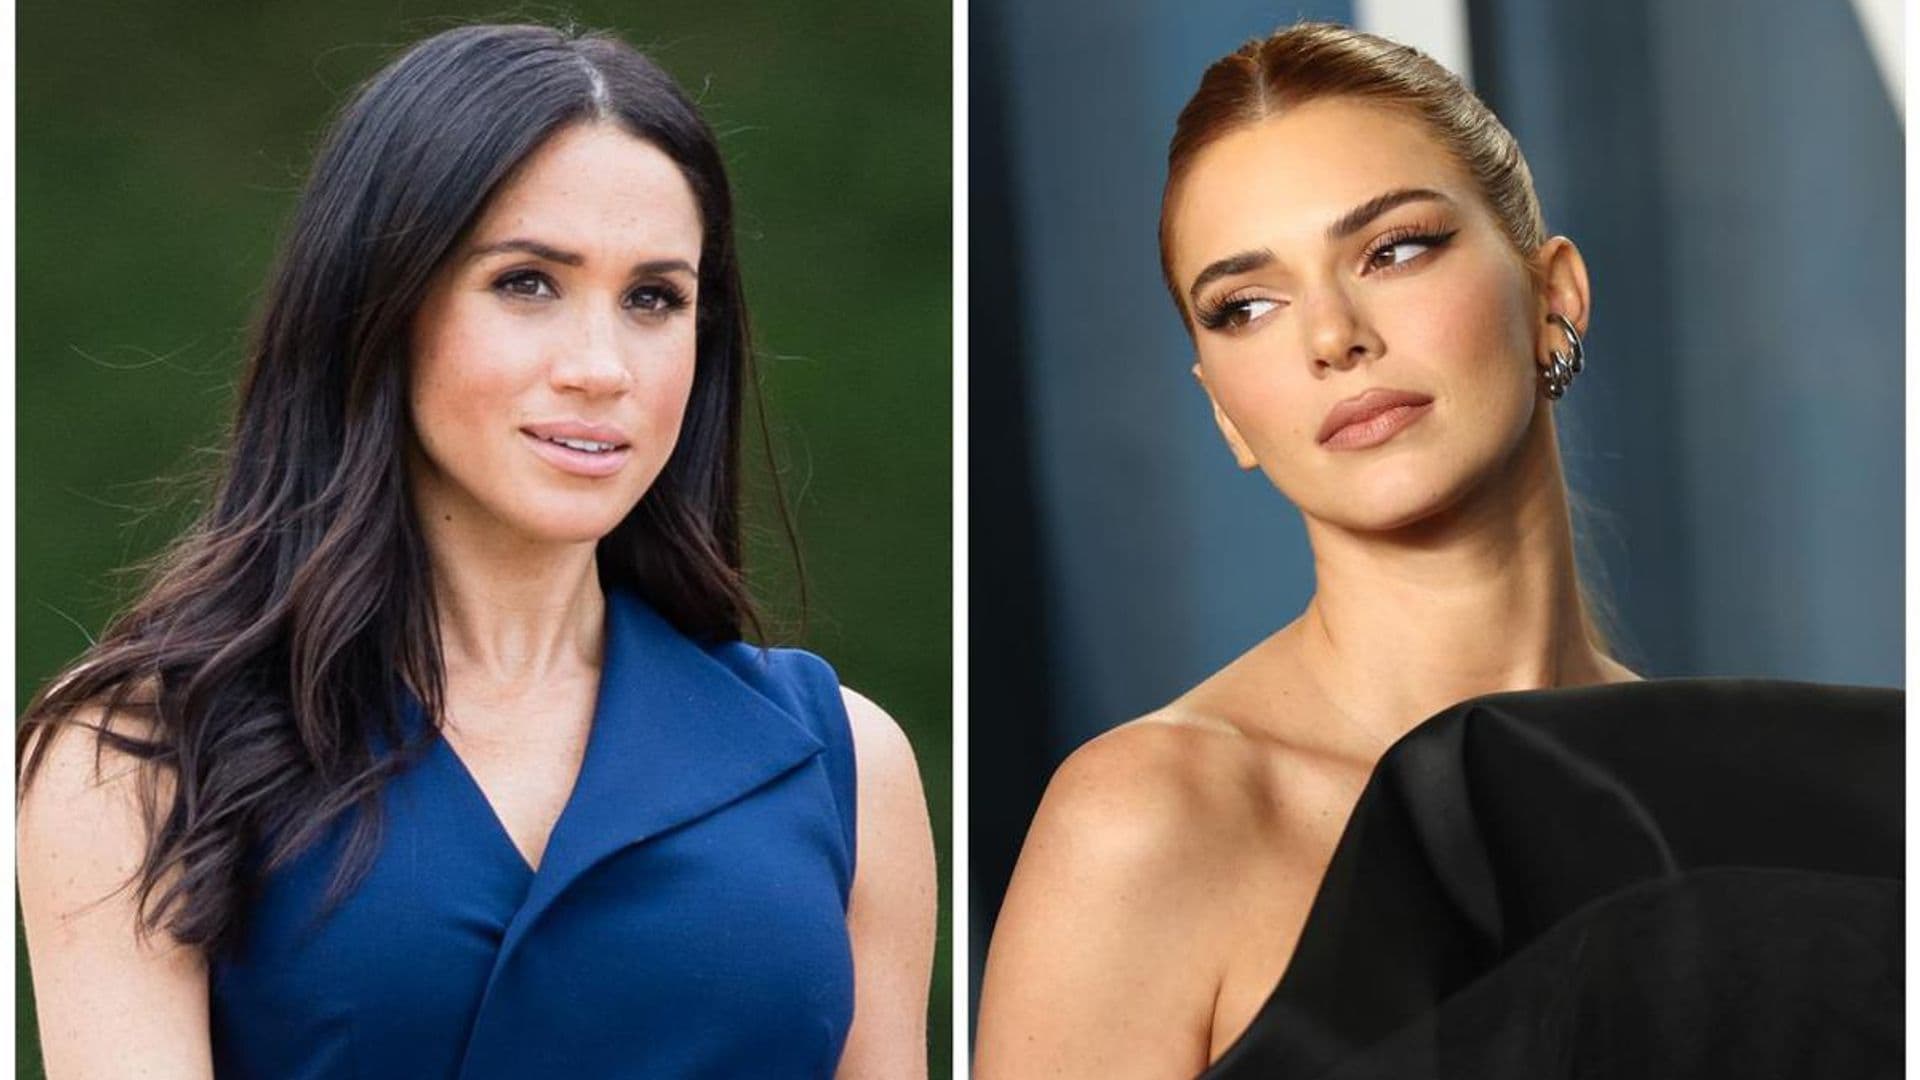 From Meghan Markle to Kendall Jenner: 10 of the biggest celebrity lawsuits of all time